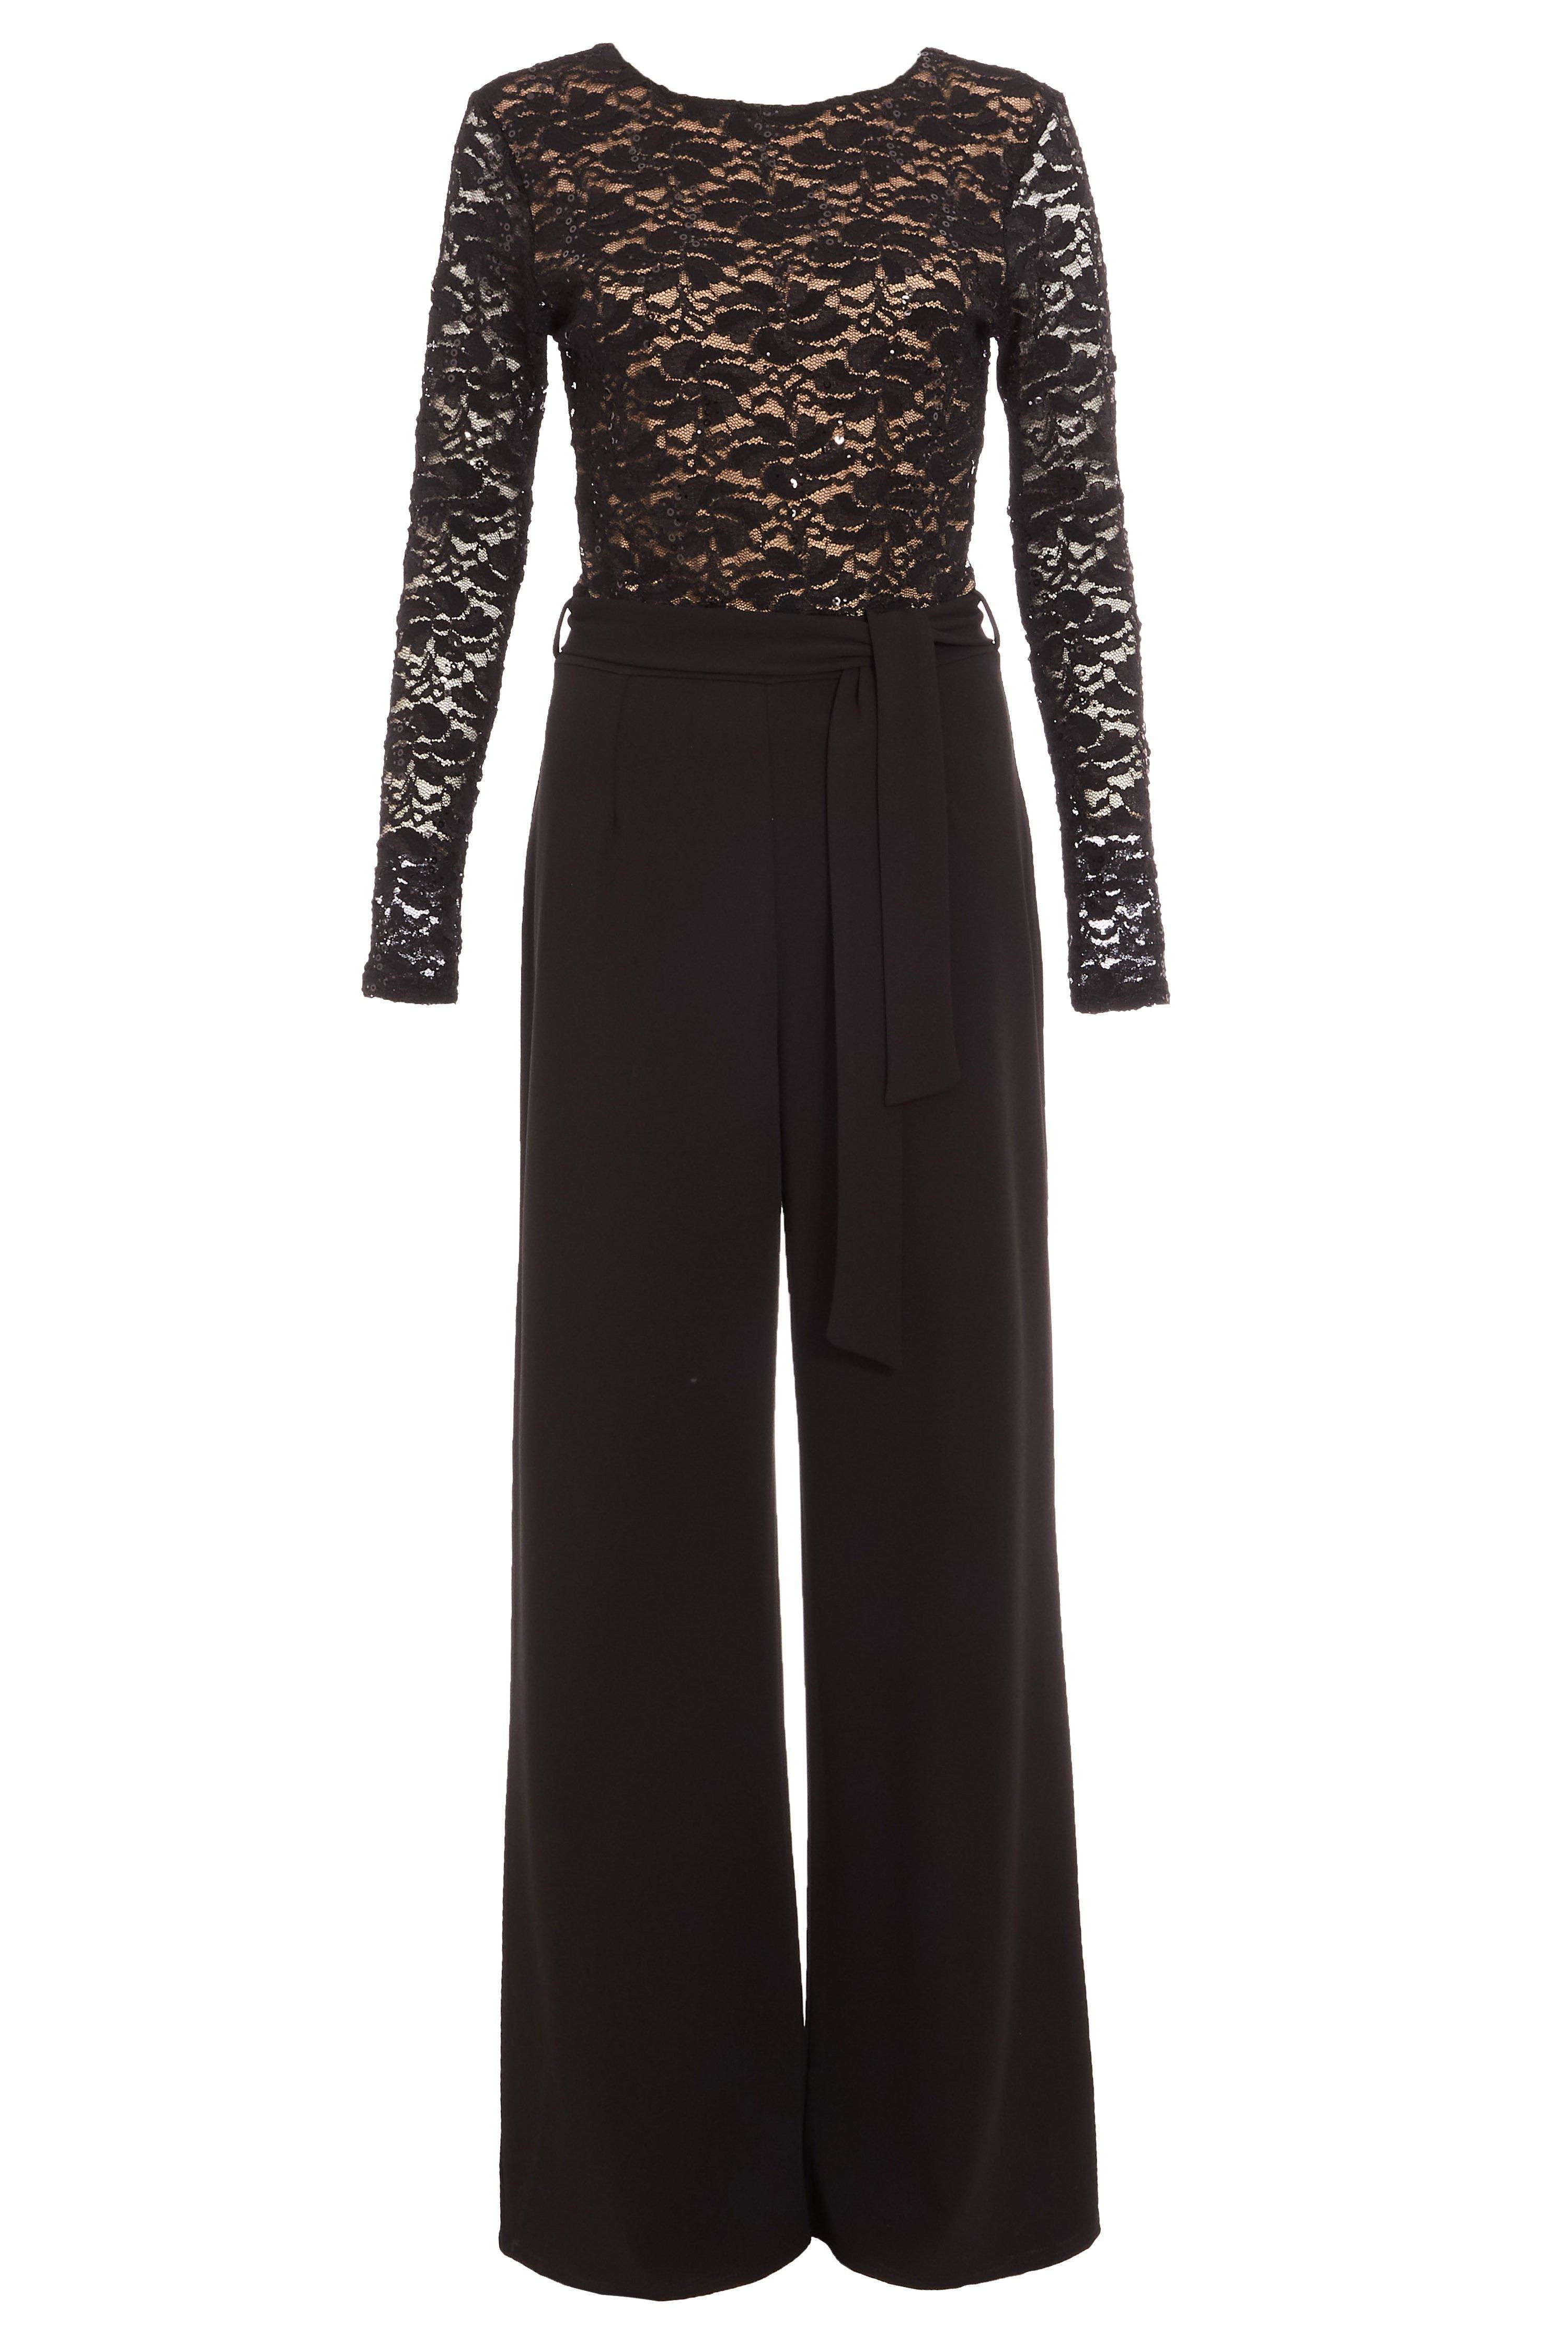 Black and Stone Lace V Back Palazzo Jumpsuit - Quiz Clothing